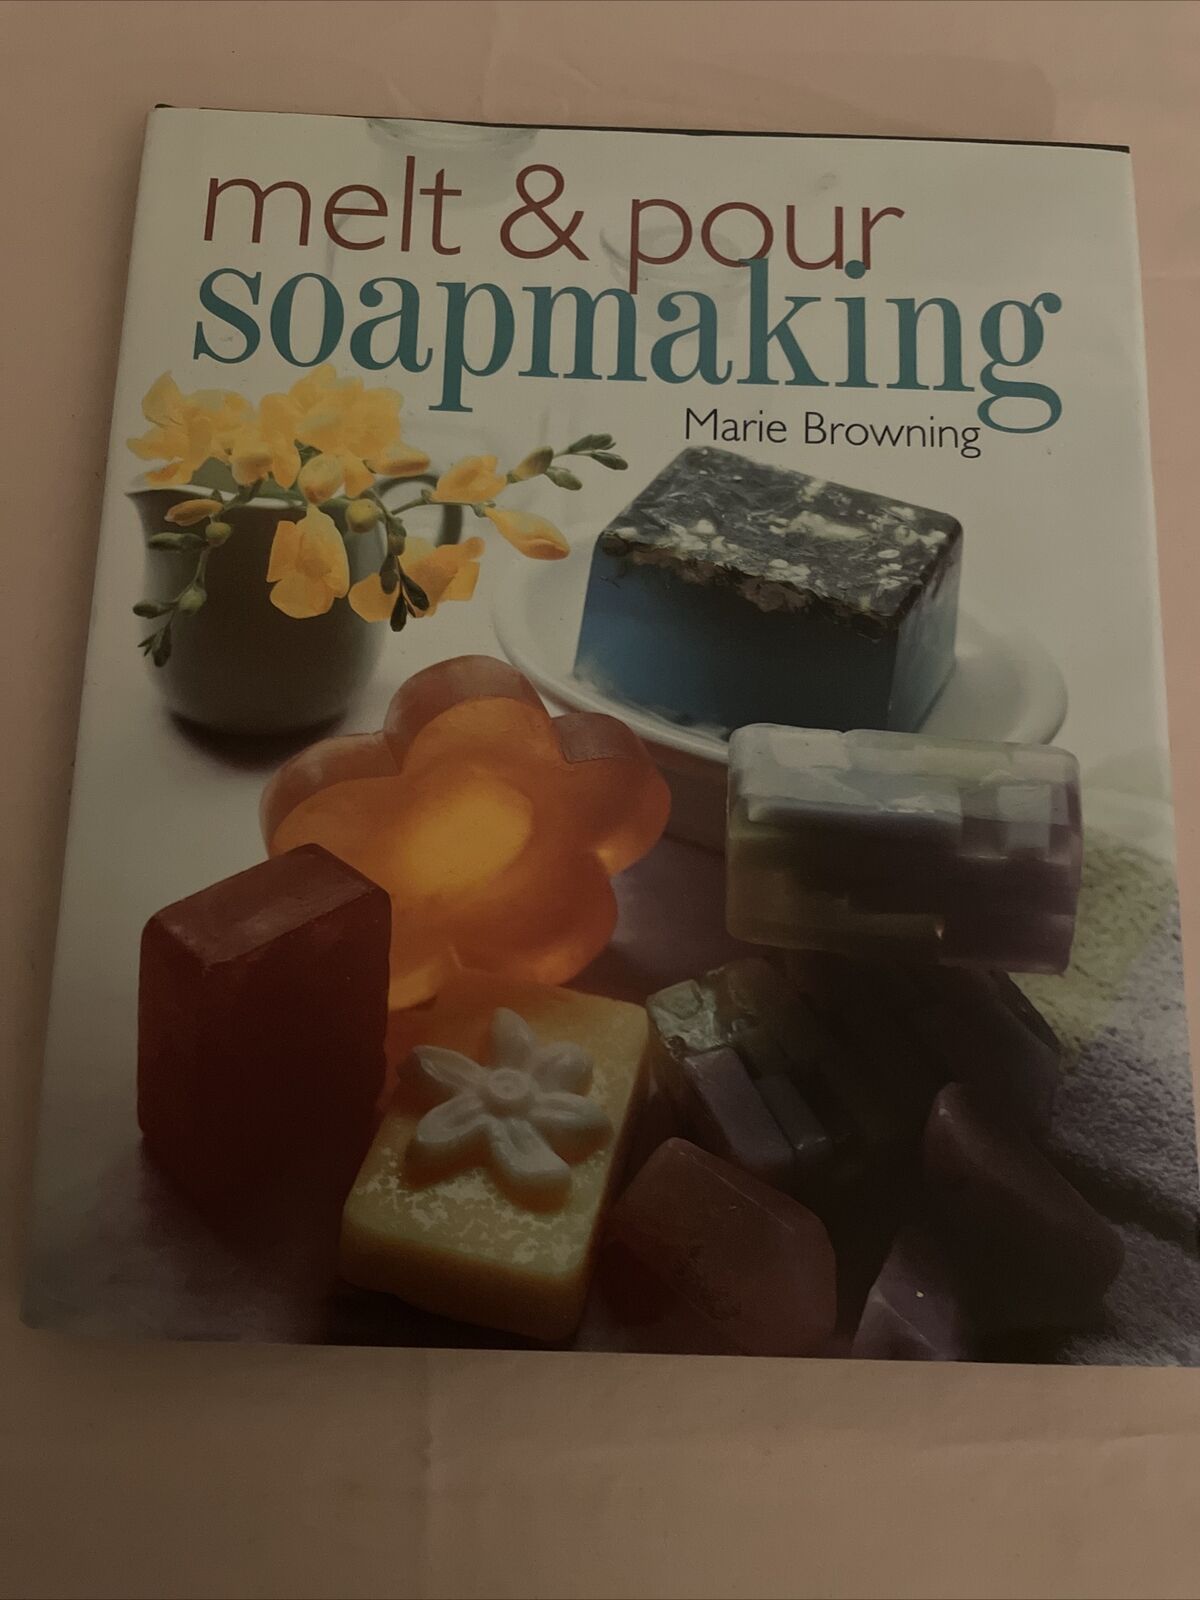 Melt & Pour Soapmaking Projects Hardcover Book Instructions Handmade Soap